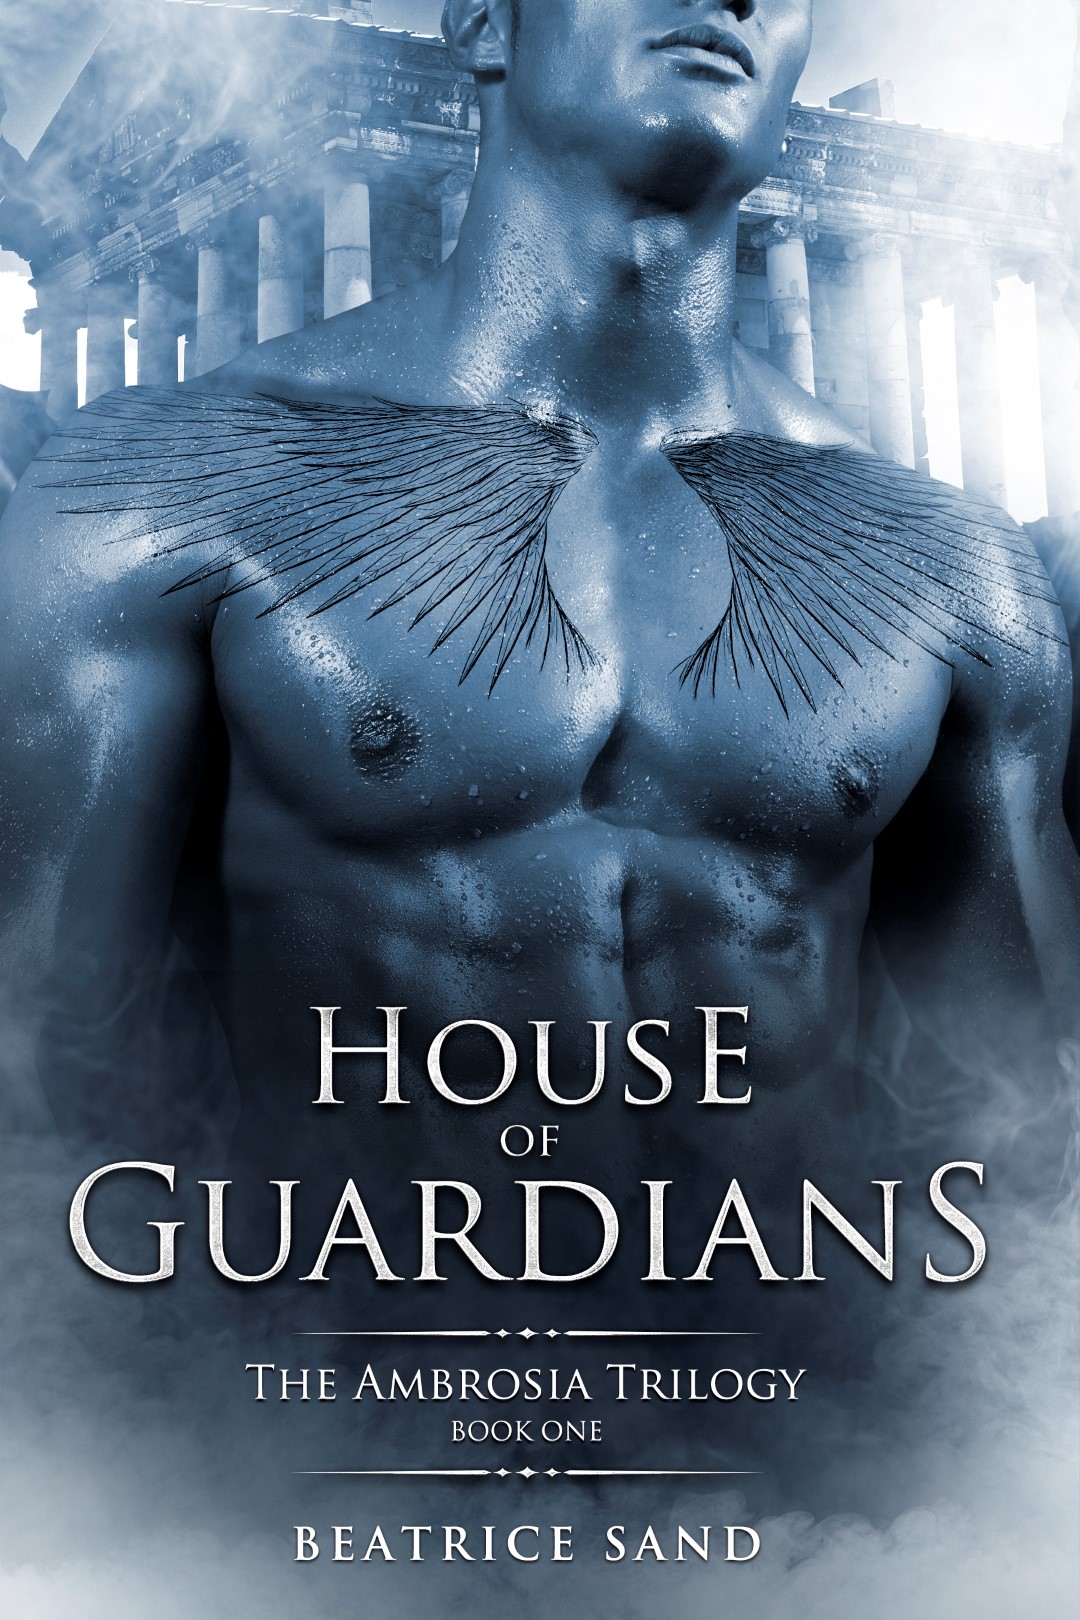 FREE: House of Guardians by Beatrice Sand